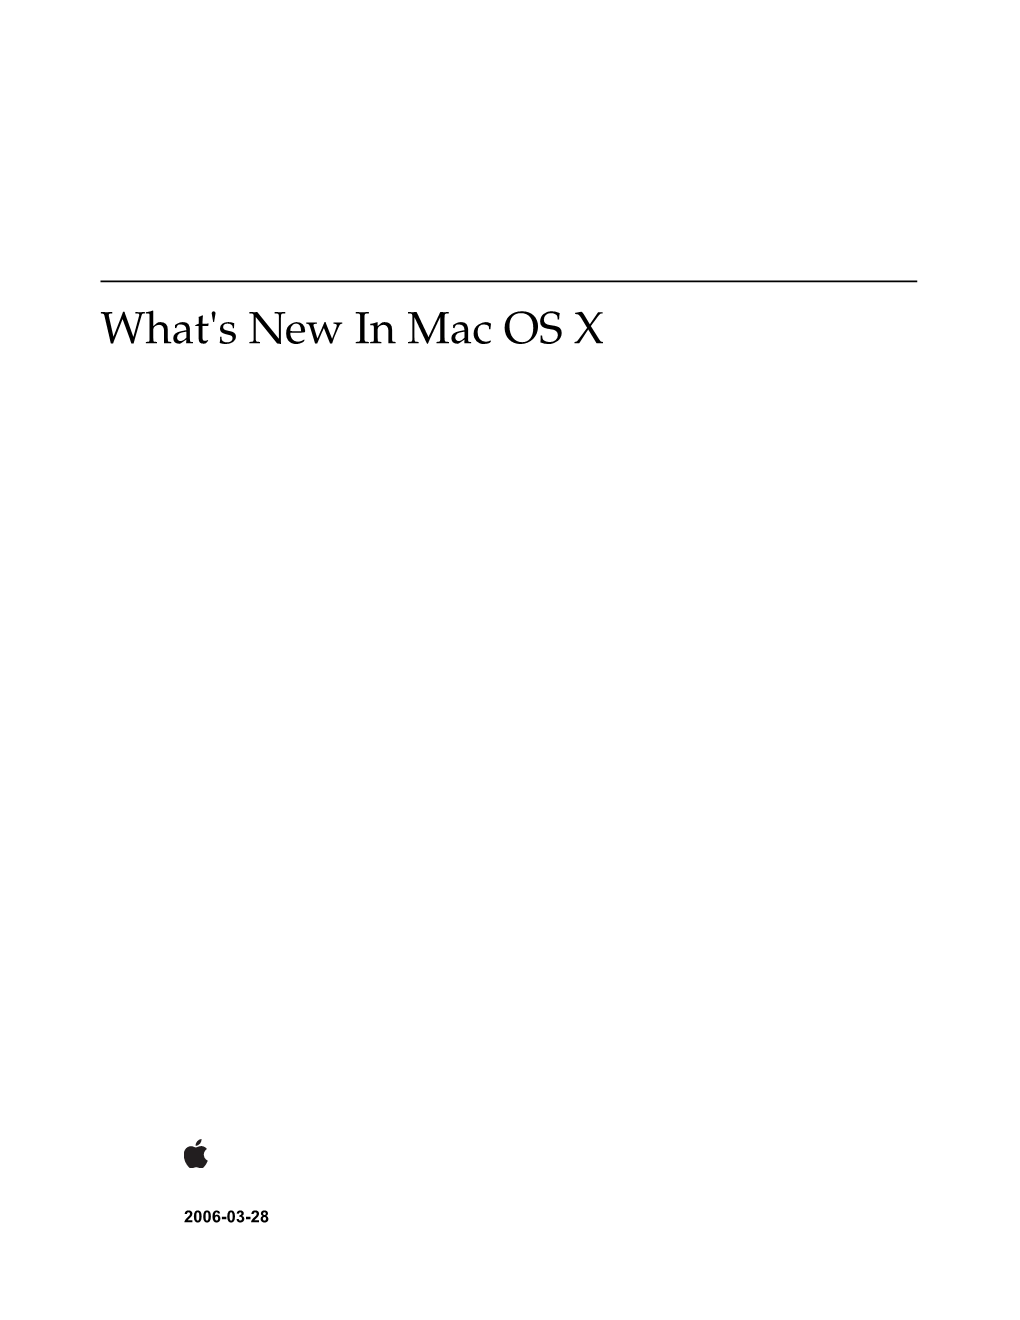 What's New in Mac OS X